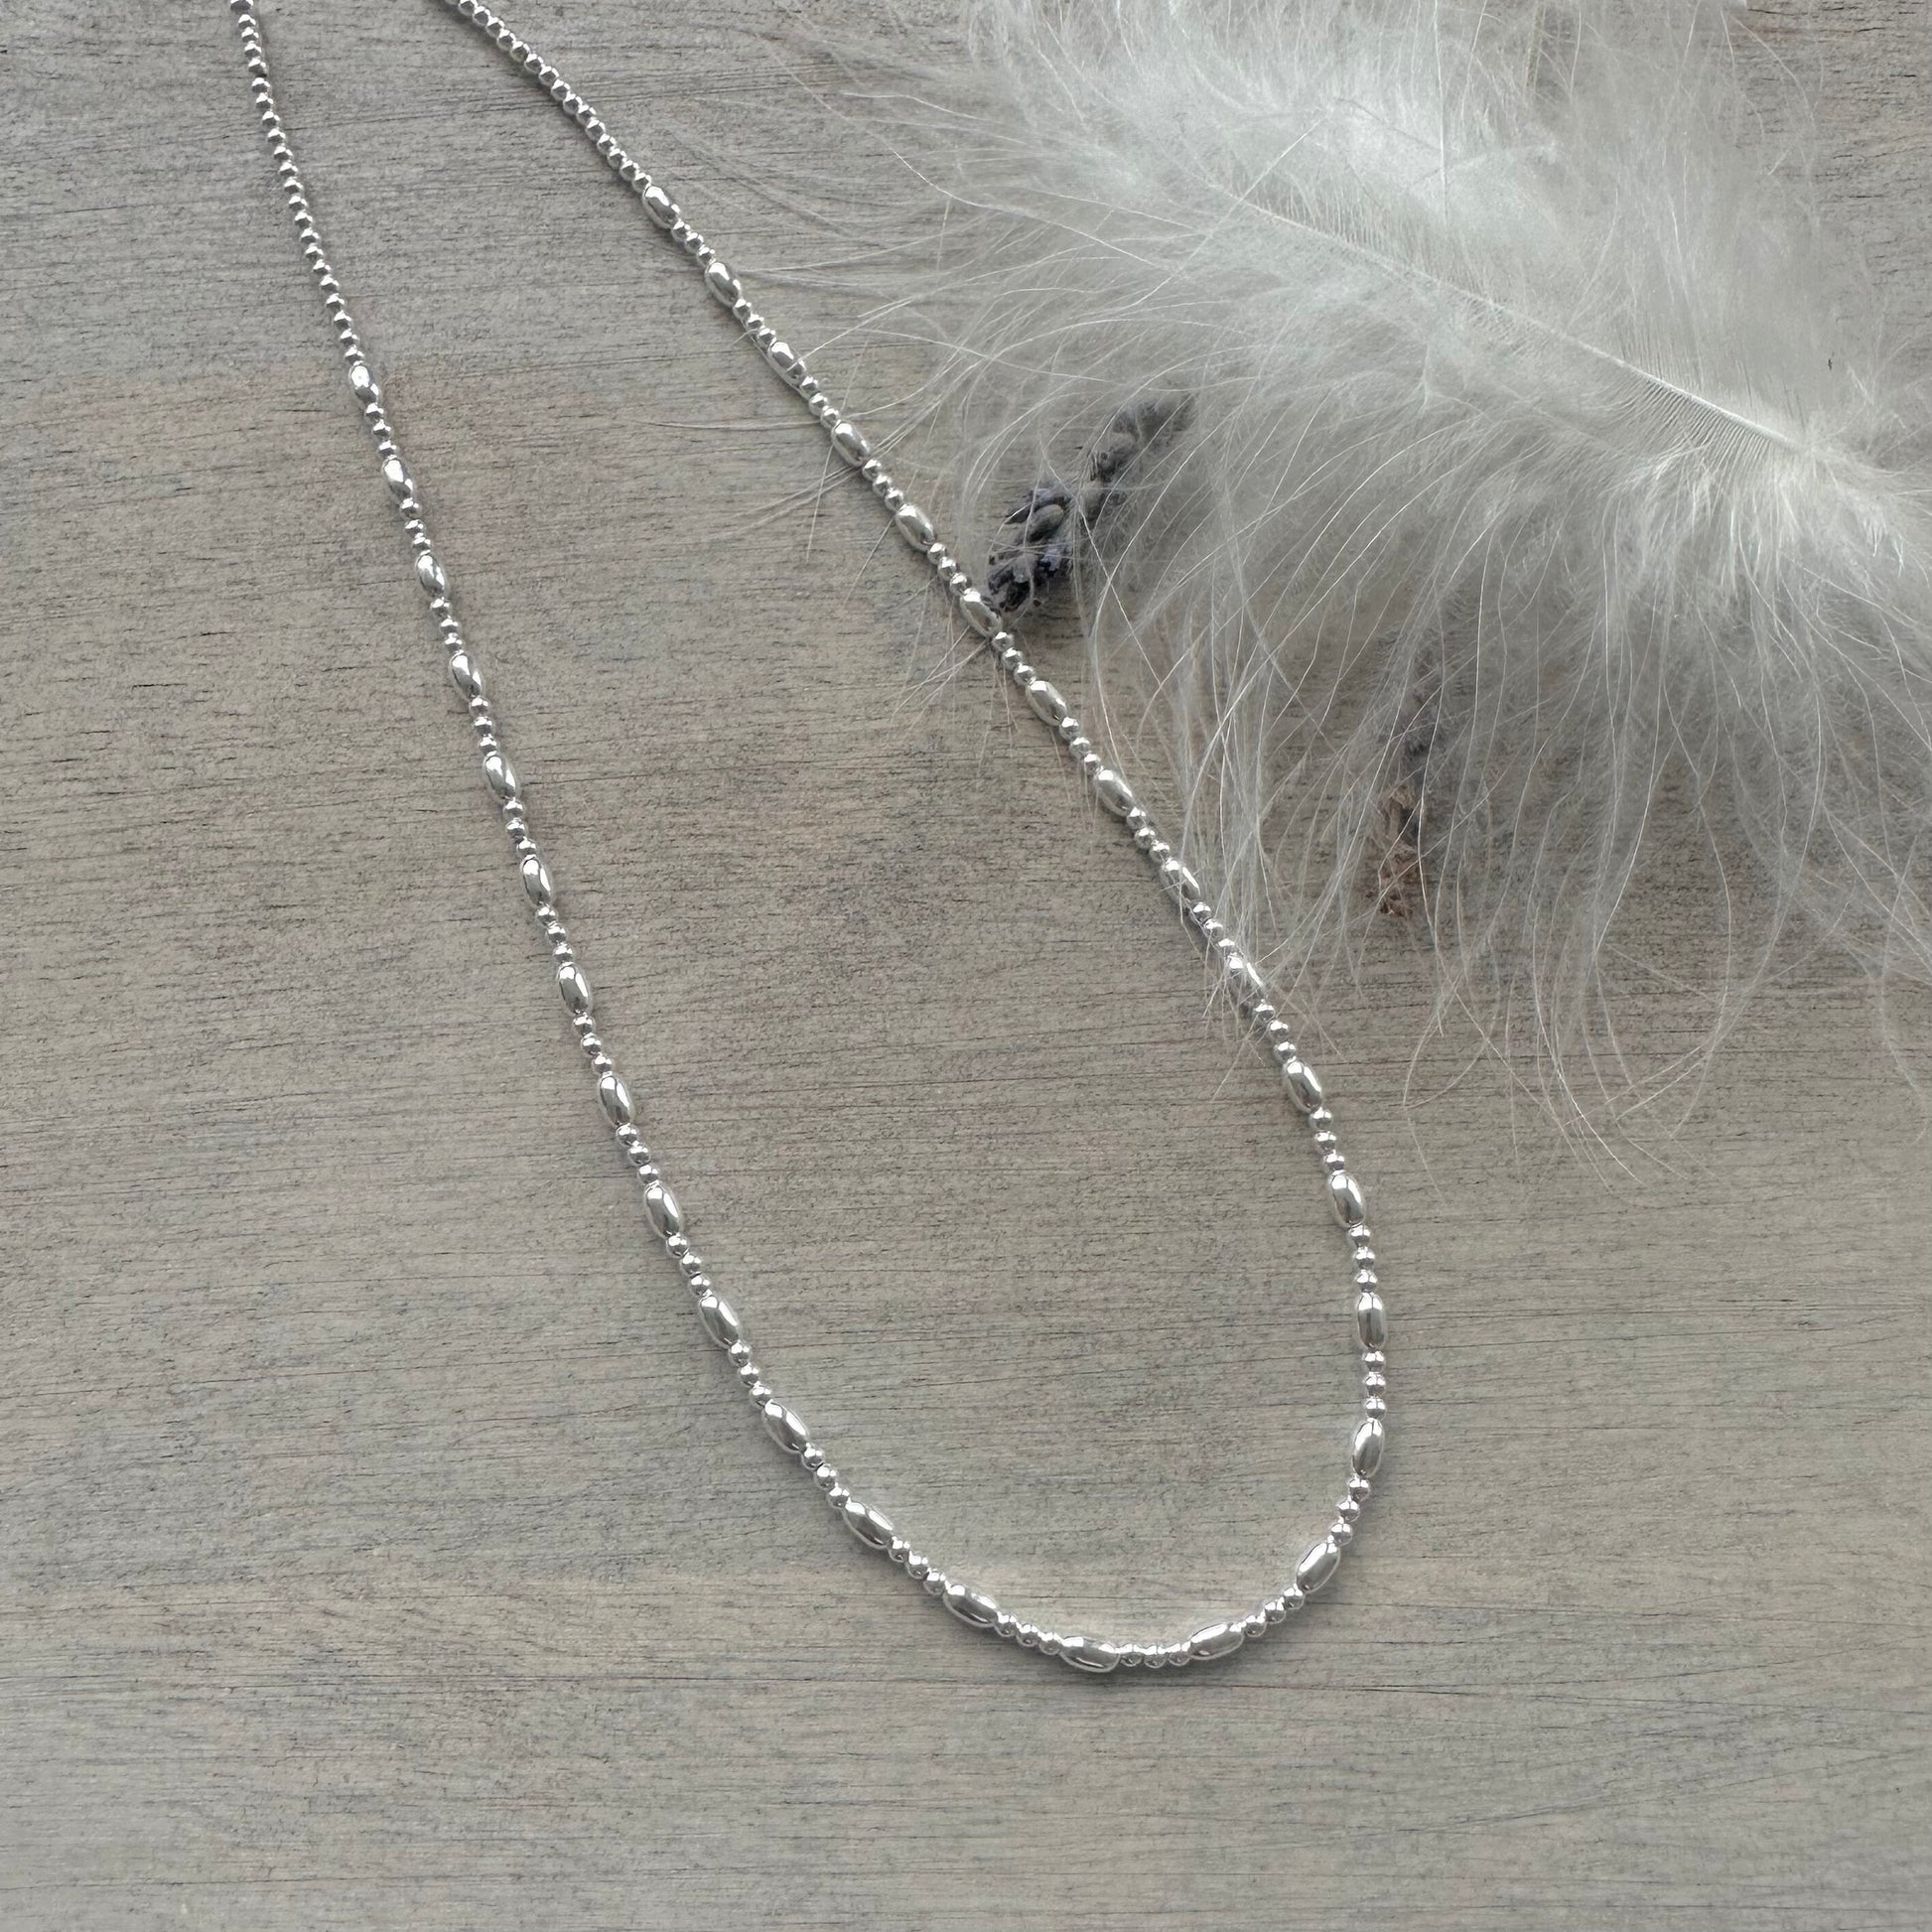 Thin Sterling Silver Oval Beaded Necklace, dainty necklace